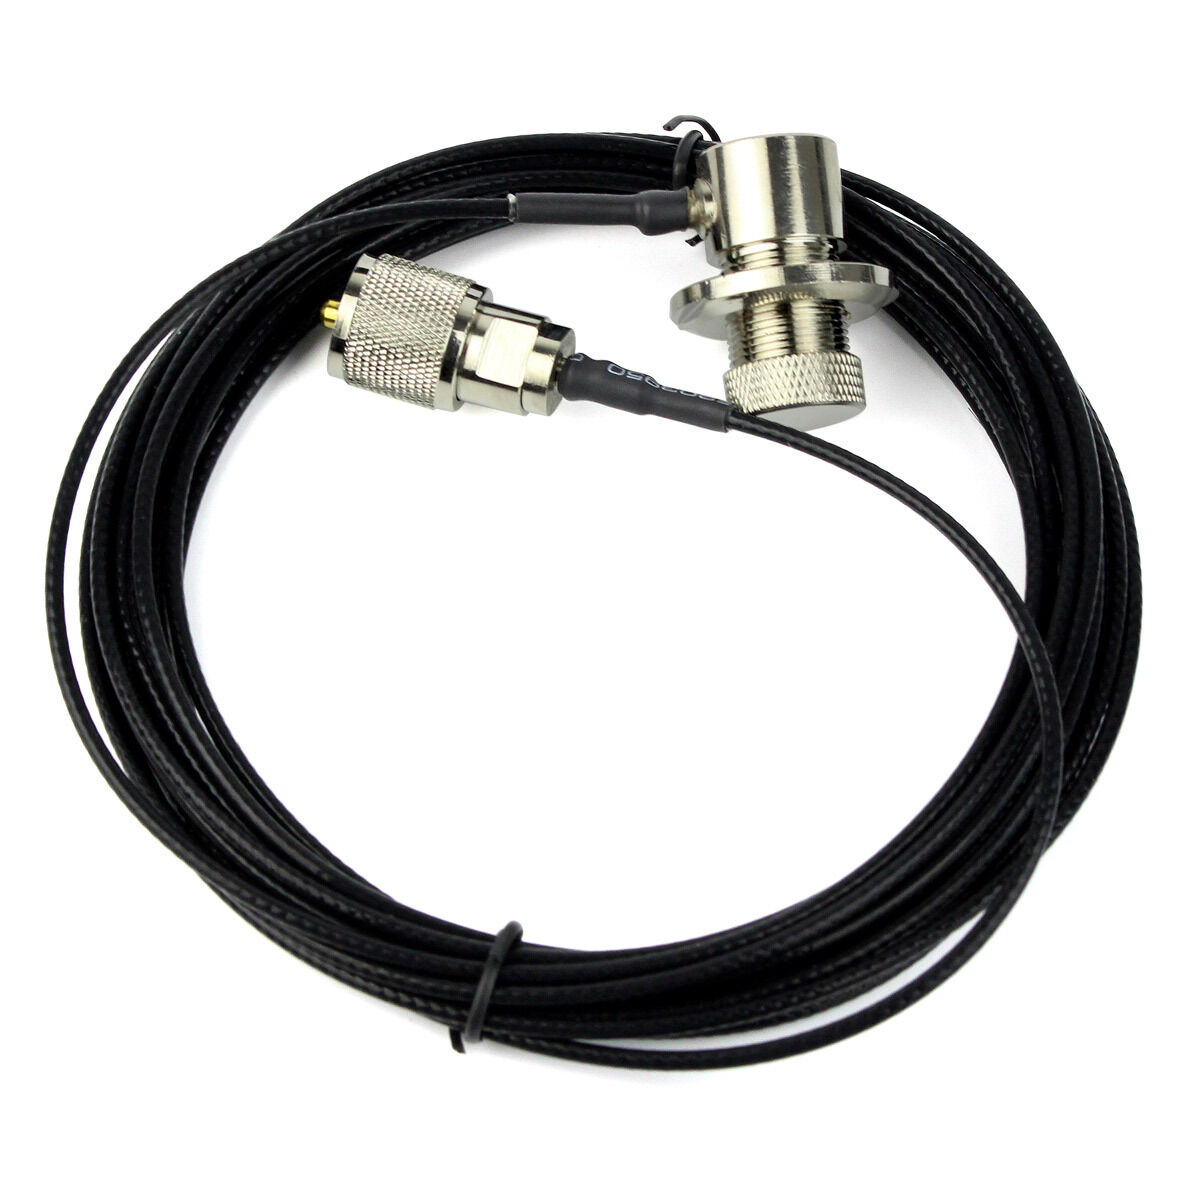 RG-316 5M Cover Extension Cable for Mobile Radio Antenna